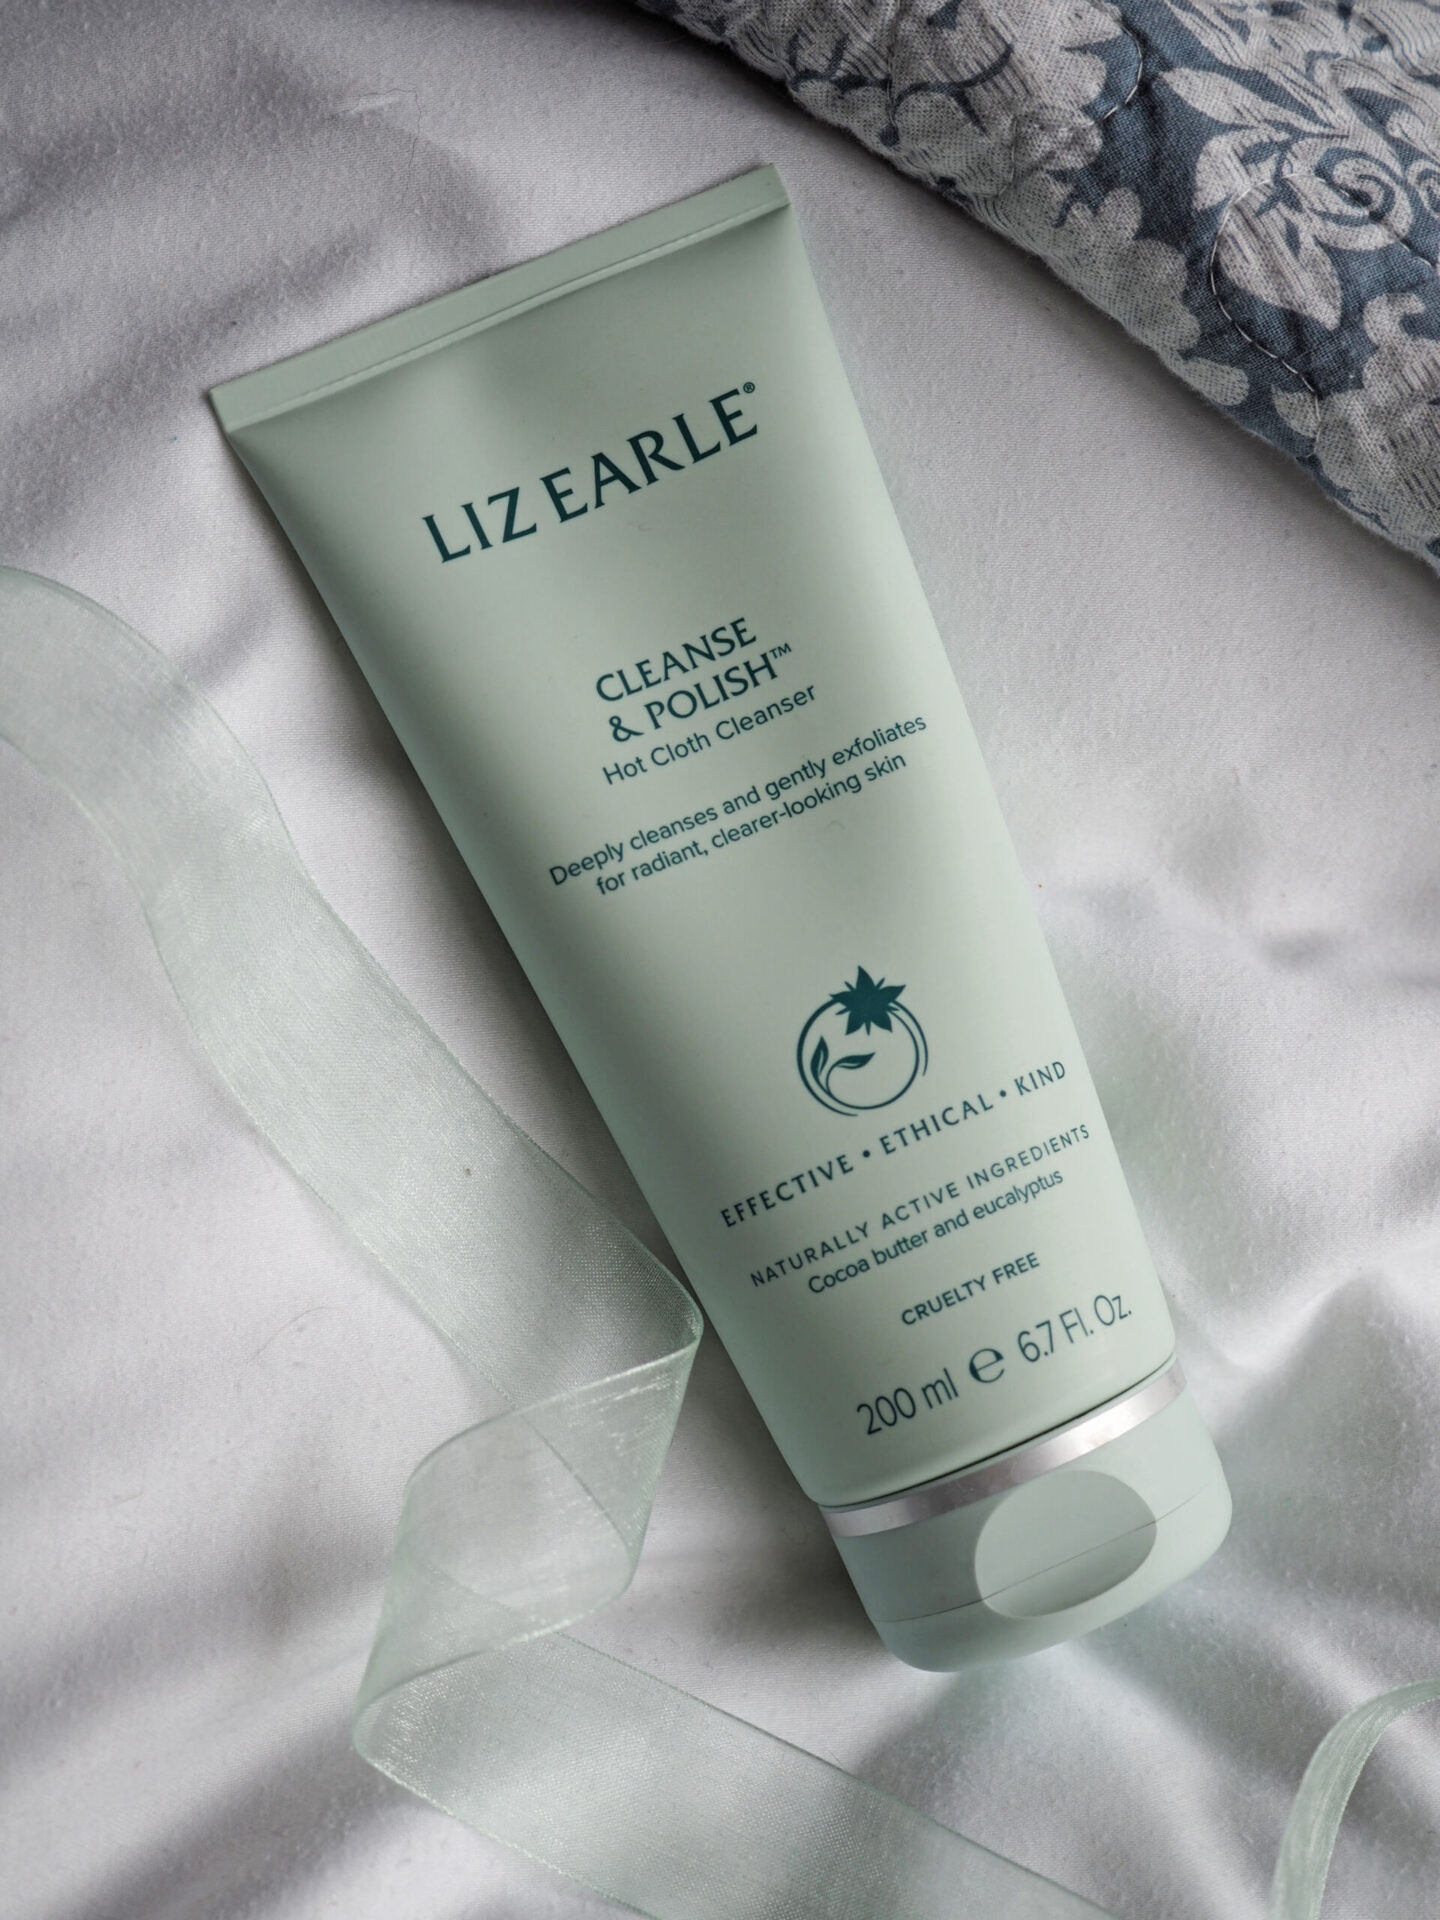 liz earle cleanse & polish review and discount code